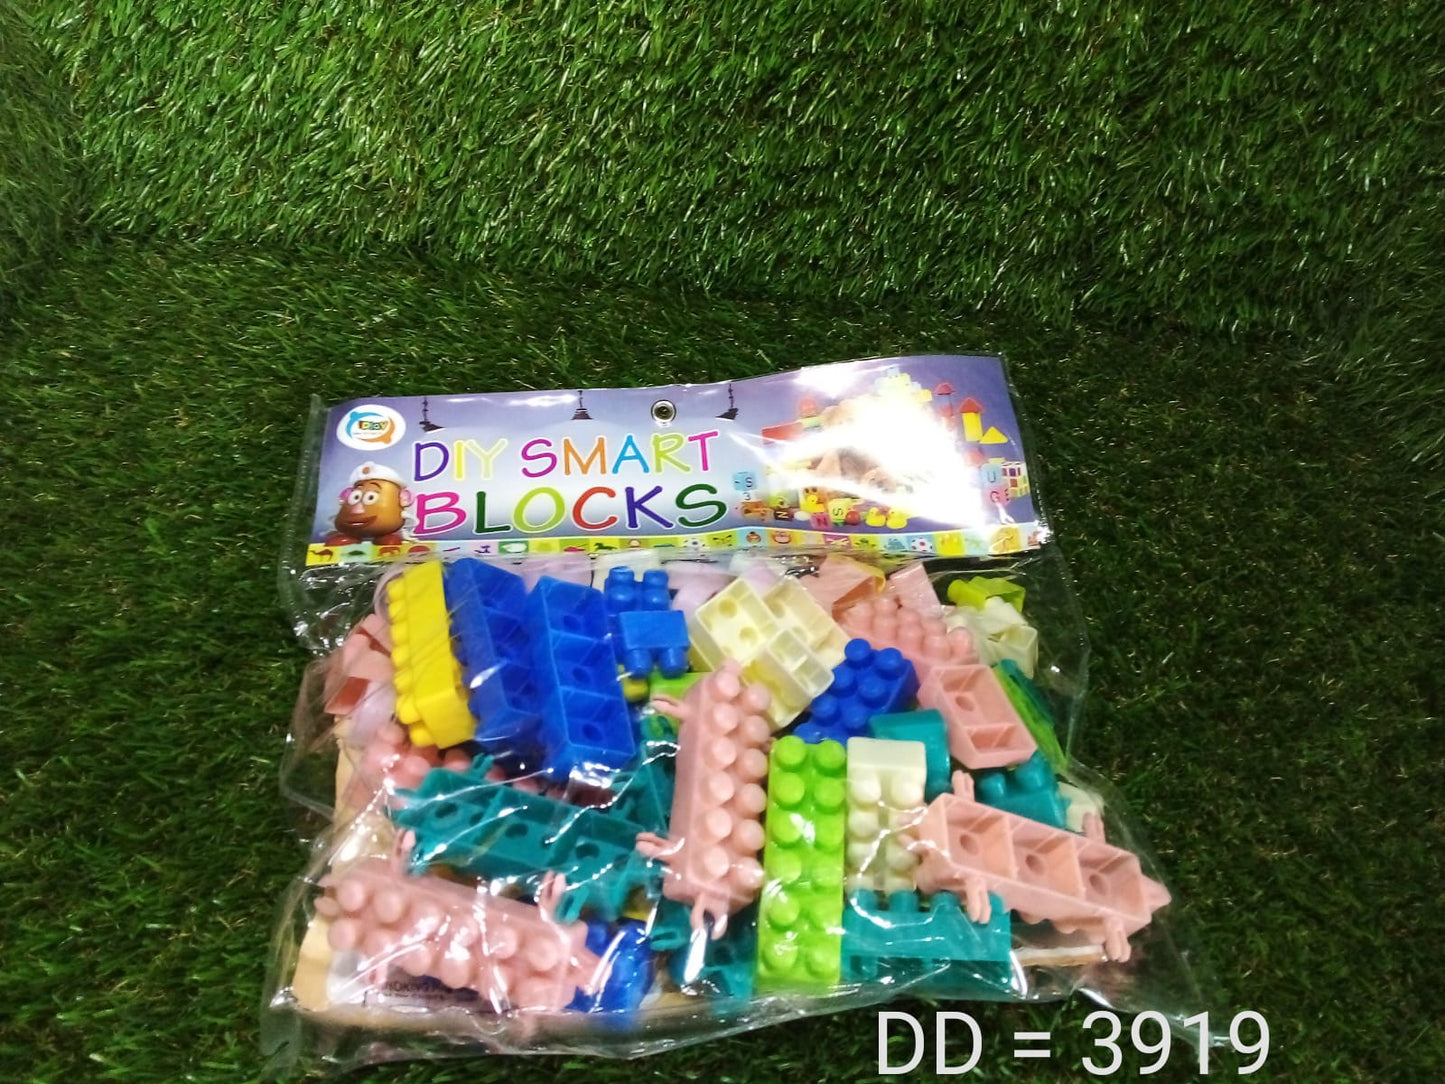 3919 100 Pc Train Candy Toy used in all kinds of household and official places specially for kids and children for their playing and enjoying purposes. DeoDap